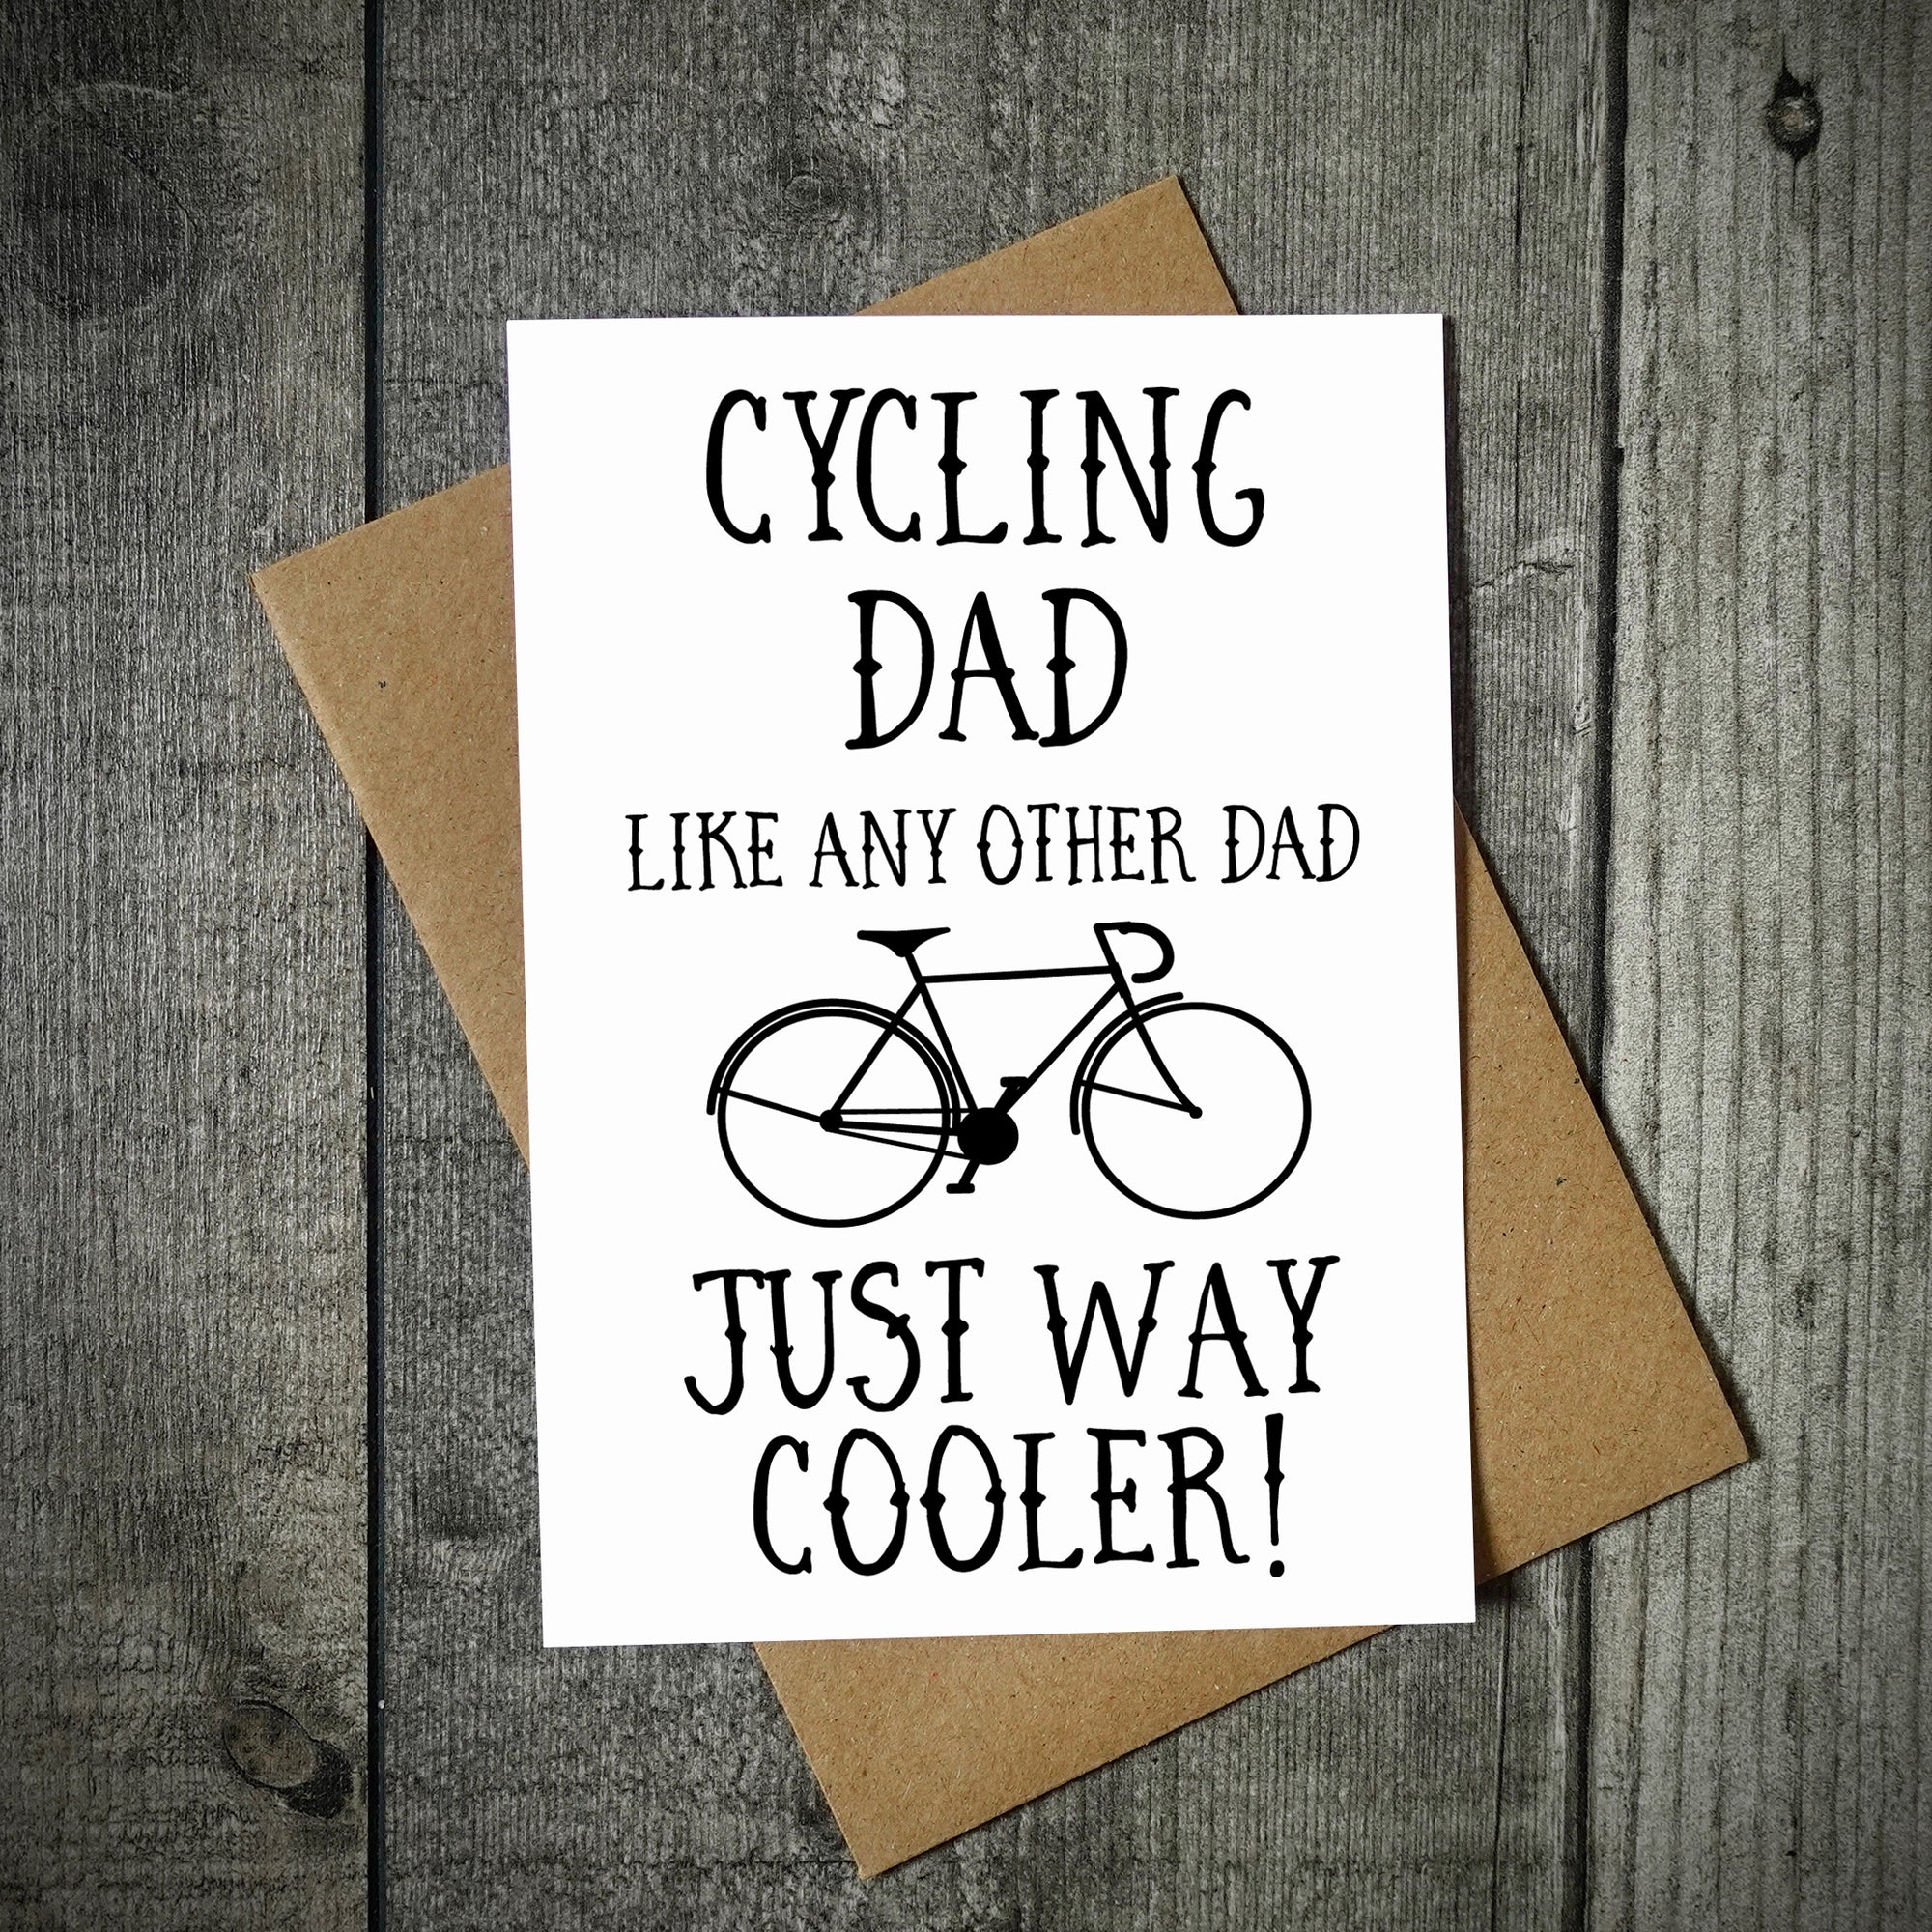 Cycling Dad Card - Like Any Other Dad Just Way Cooler